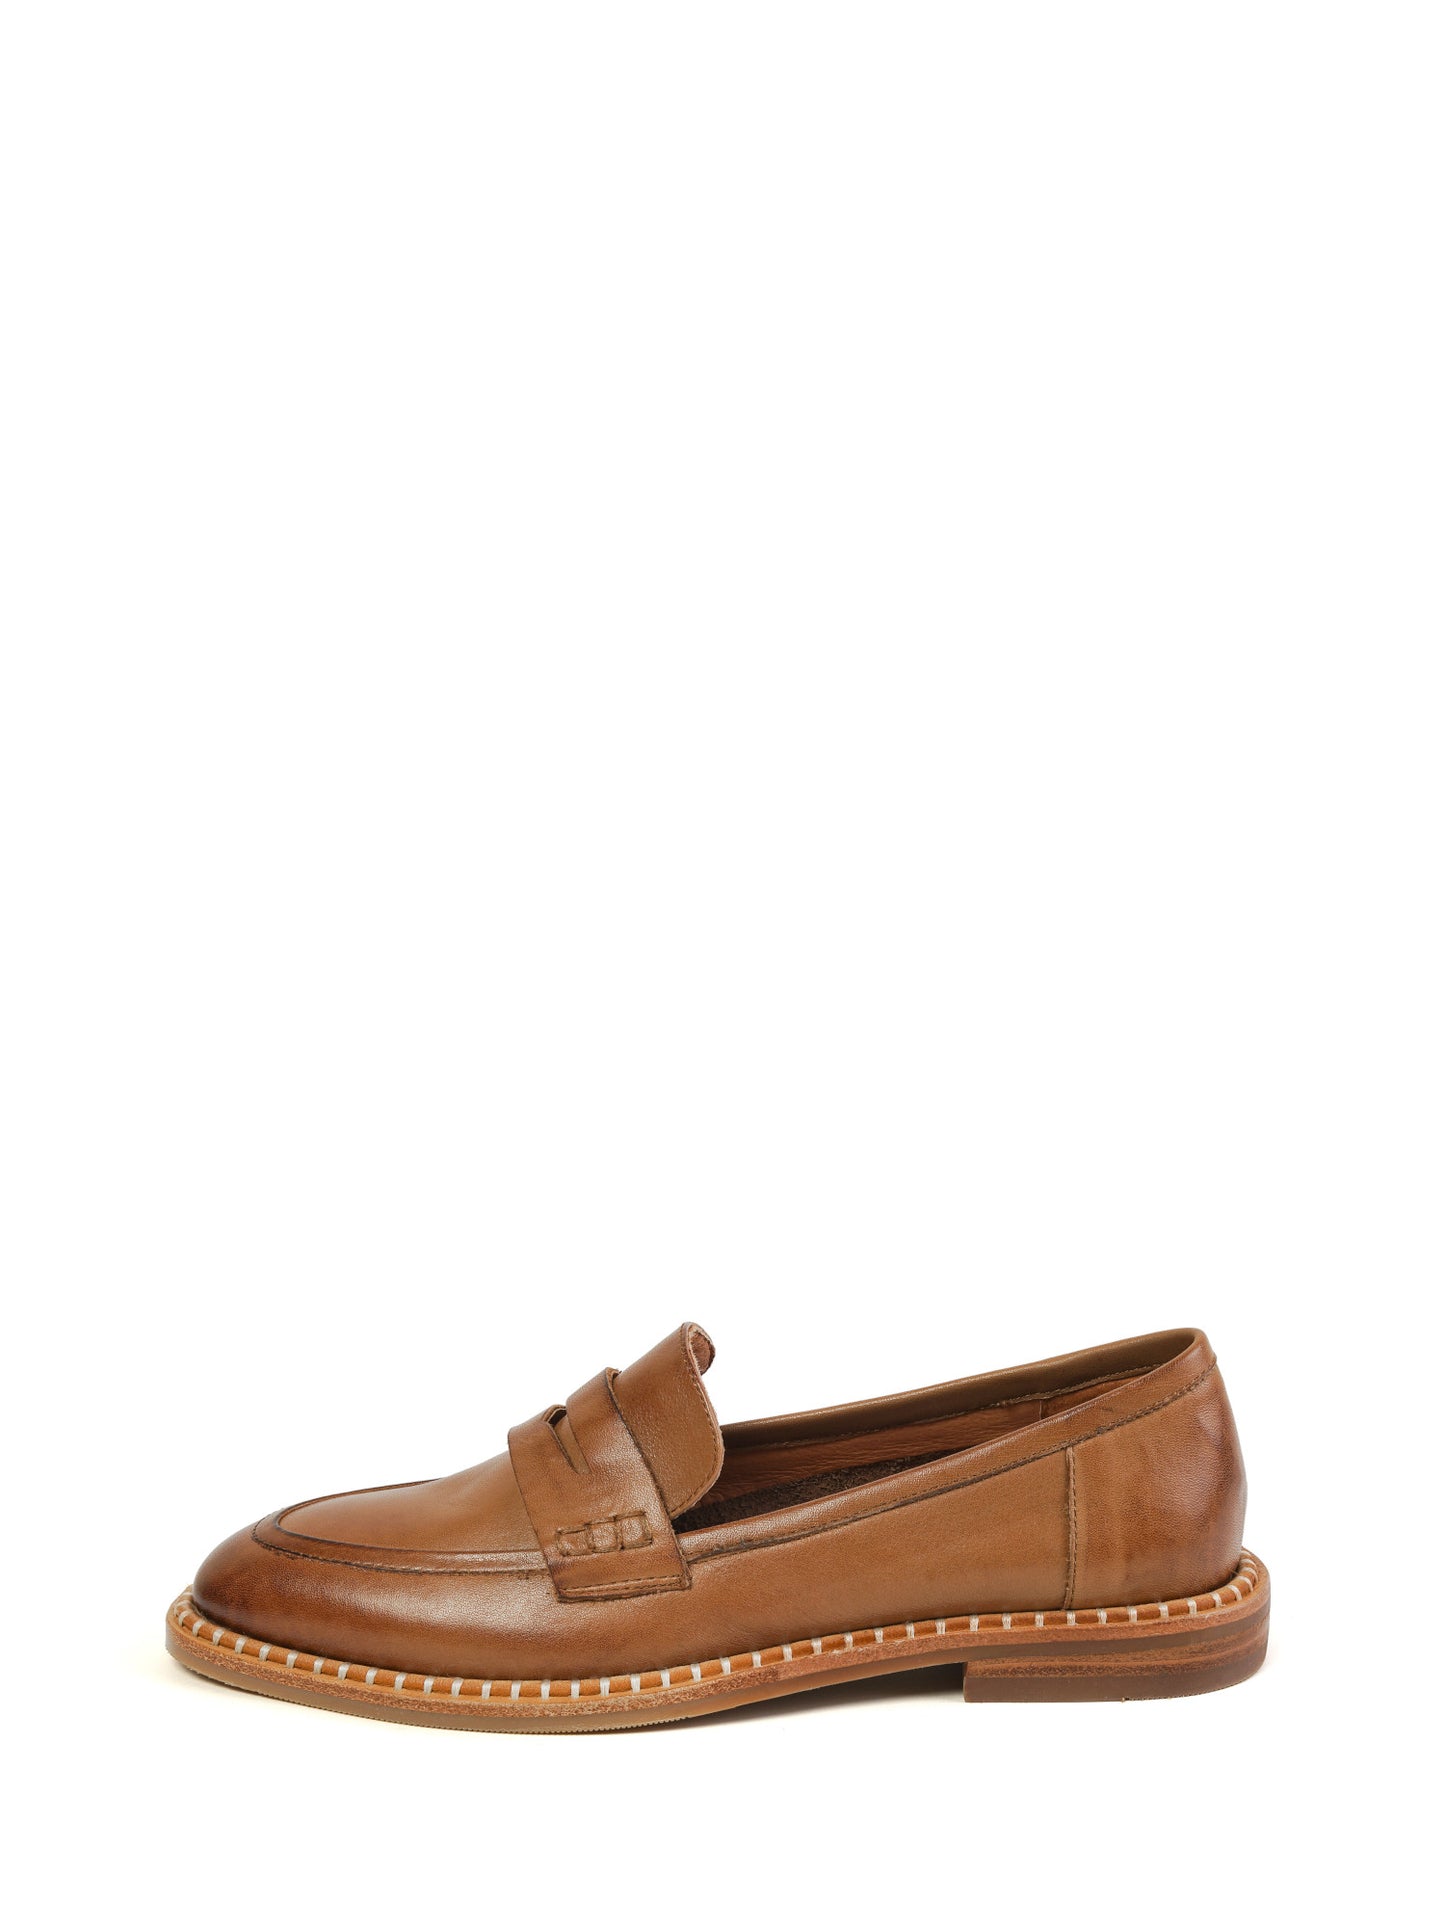 Cali-Tan-Leather-Penny-Loafer